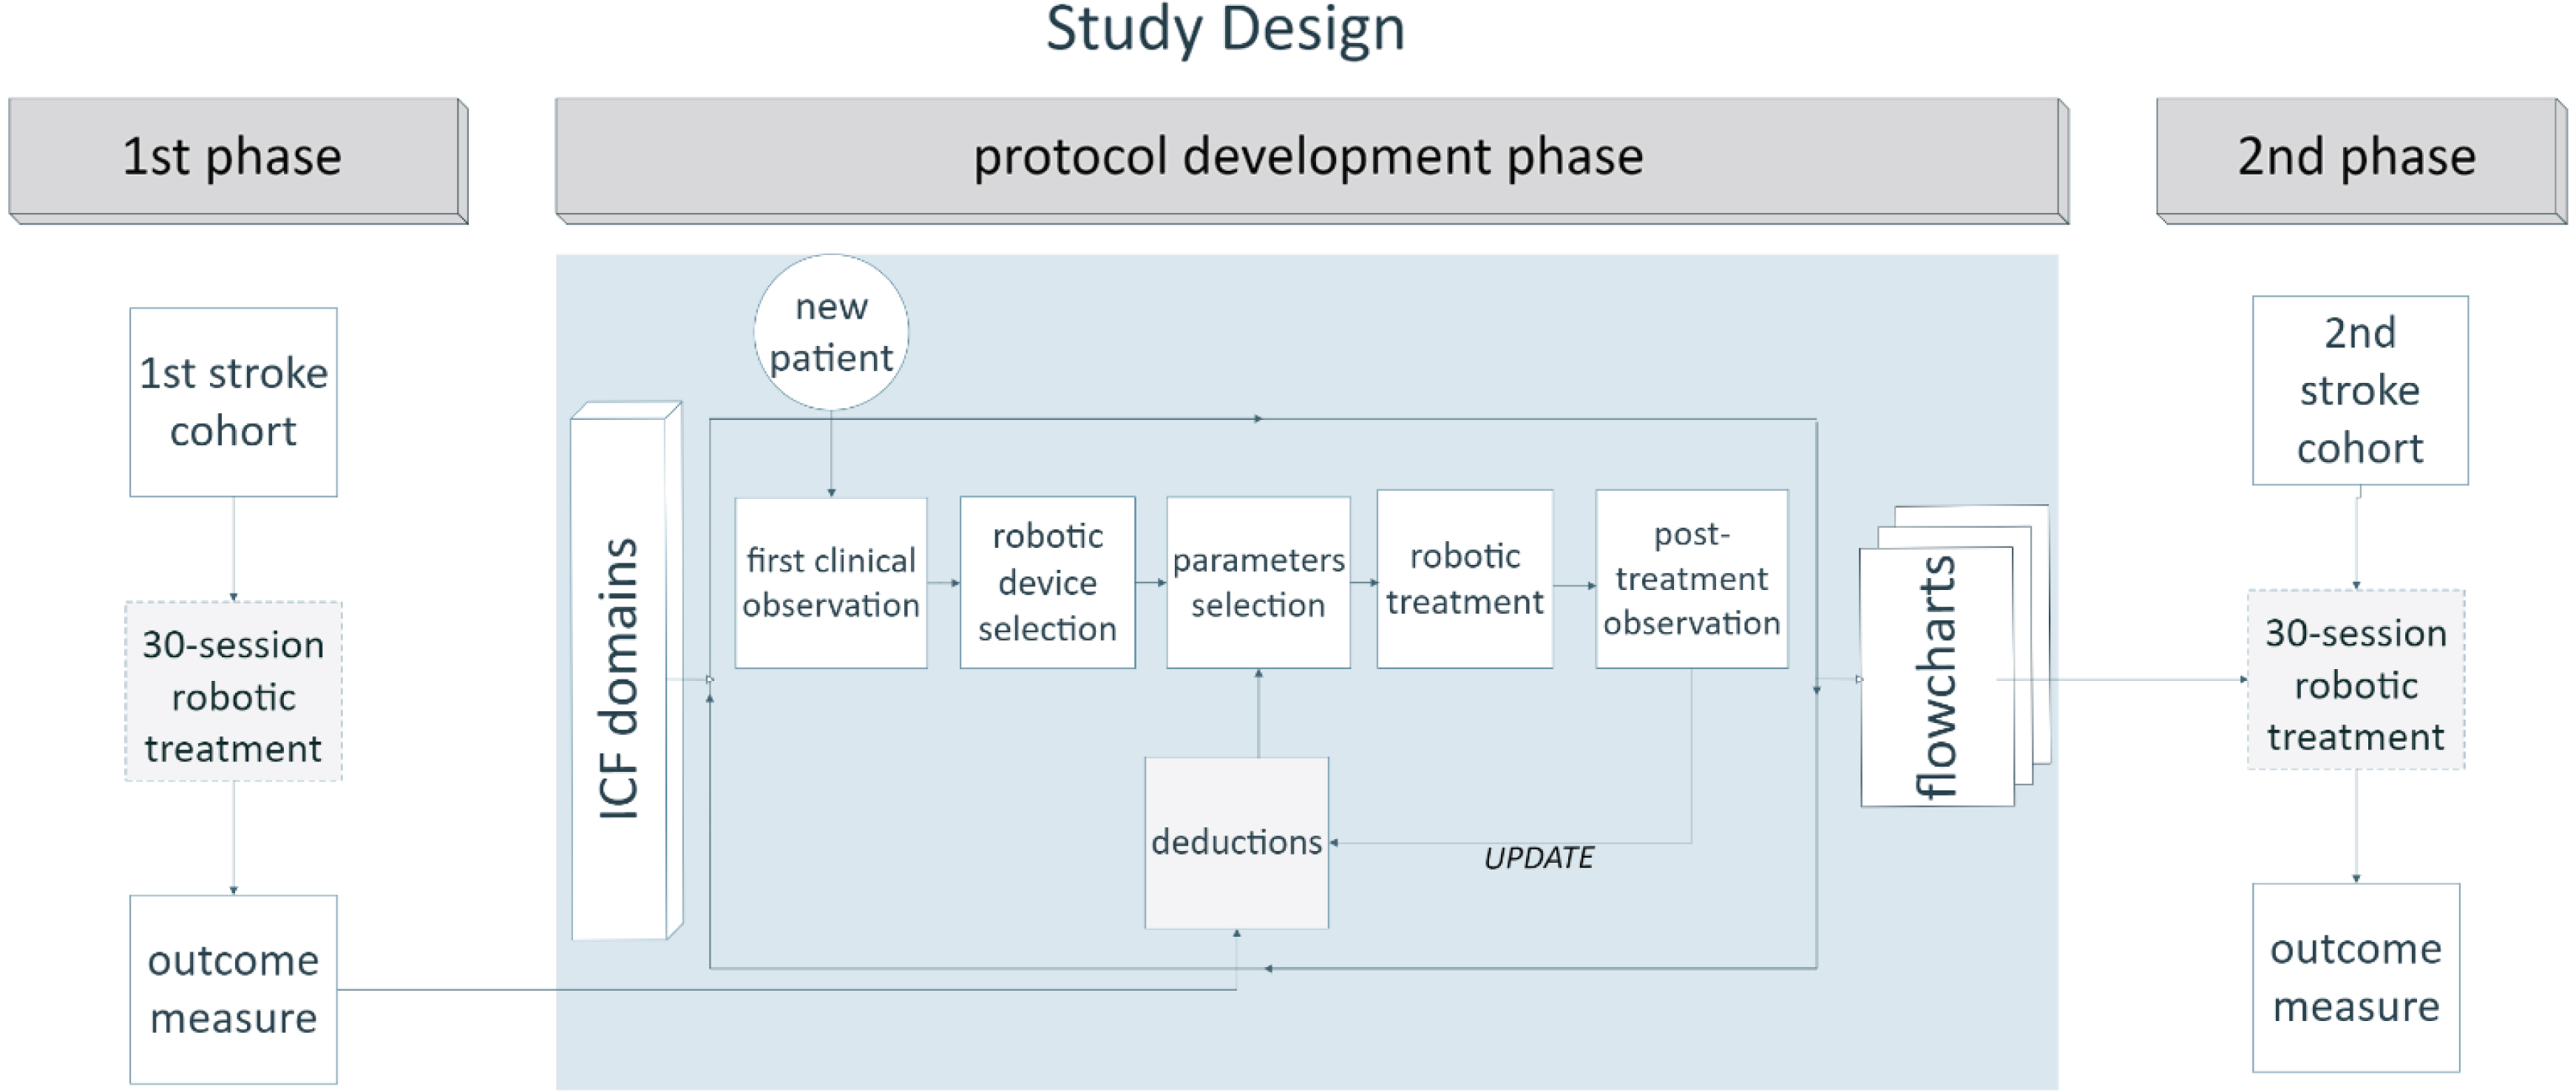 Diagram of study design. Representation of the strategic phases of the work. In the initial phase, the first cohort of stroke patients underwent a 30-session robotic treatment without any defined, structured protocol. An intermediate phase consisted of protocol development based on an empirical method, starting from a daily evaluation of individual patients (within a new, intermediate group of patients) before and after treatment, and progressing to the construction of flowcharts with practical indications about parameter selection for each robot. Each intermediate evaluation helped to update therapists’ deductions regarding the optimal parameter selection. Treatment was tailored to the specific patient’s condition and was based on the evaluation of his/her ICF domains, namely range of motion, strength, spasticity, and pain. Finally, a new cohort of patients underwent a robotic treatment based on the implemented protocol. Data from the first (control) and the last (experimental) group of patients were included in our retrospective analysis. See the text for more details.